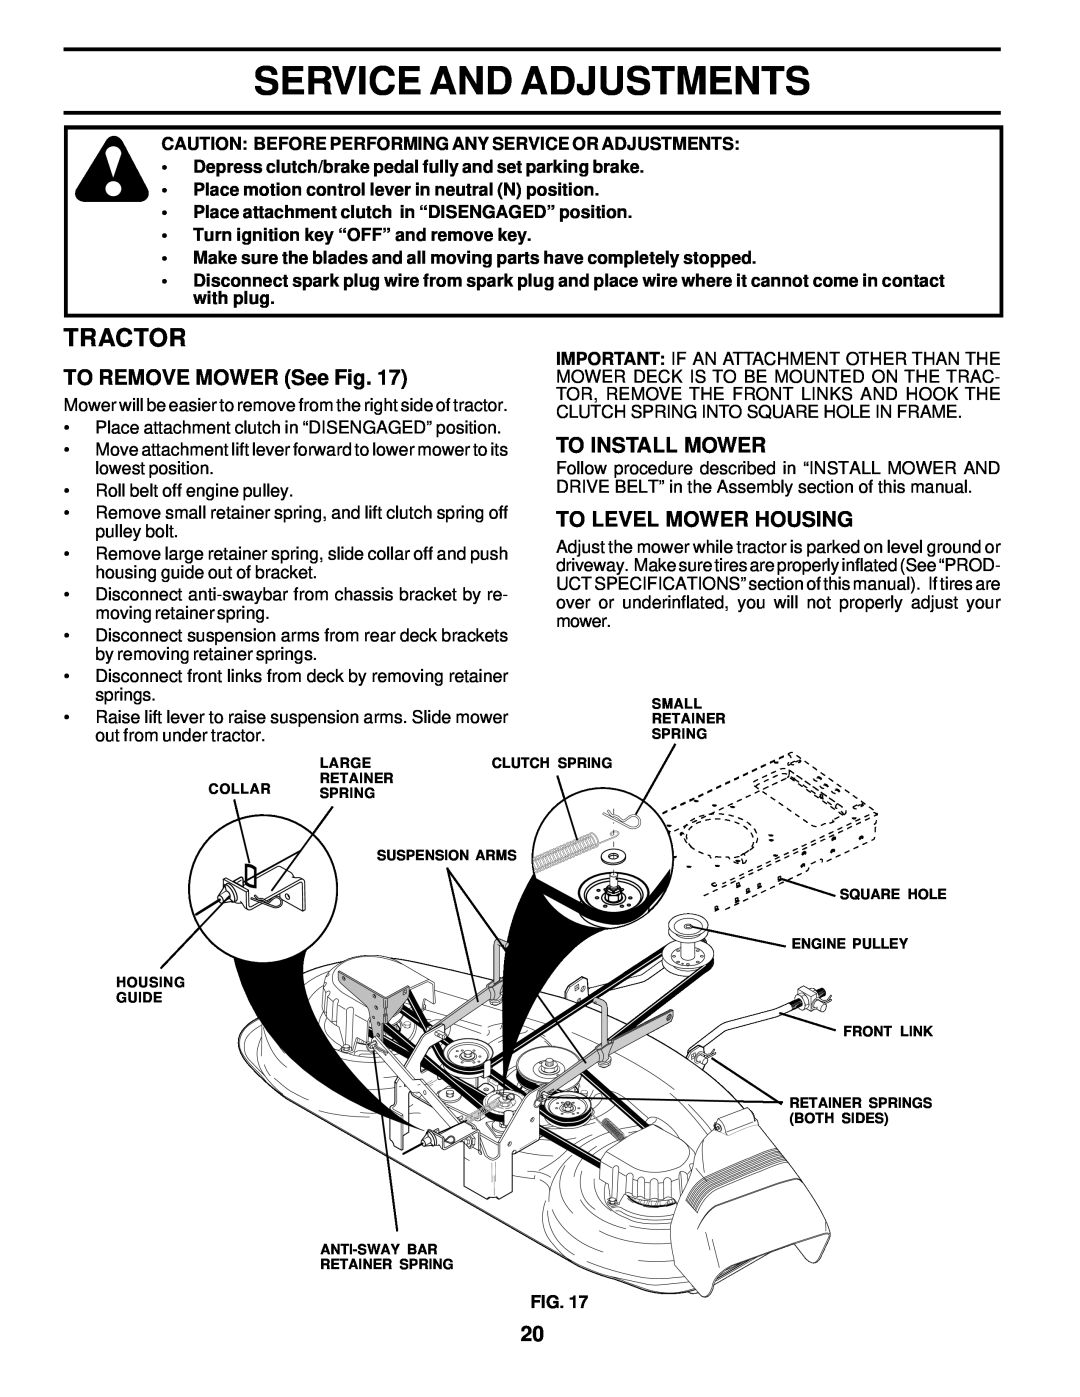 Weed Eater 178277 Service And Adjustments, TO REMOVE MOWER See Fig, To Install Mower, To Level Mower Housing, Tractor 